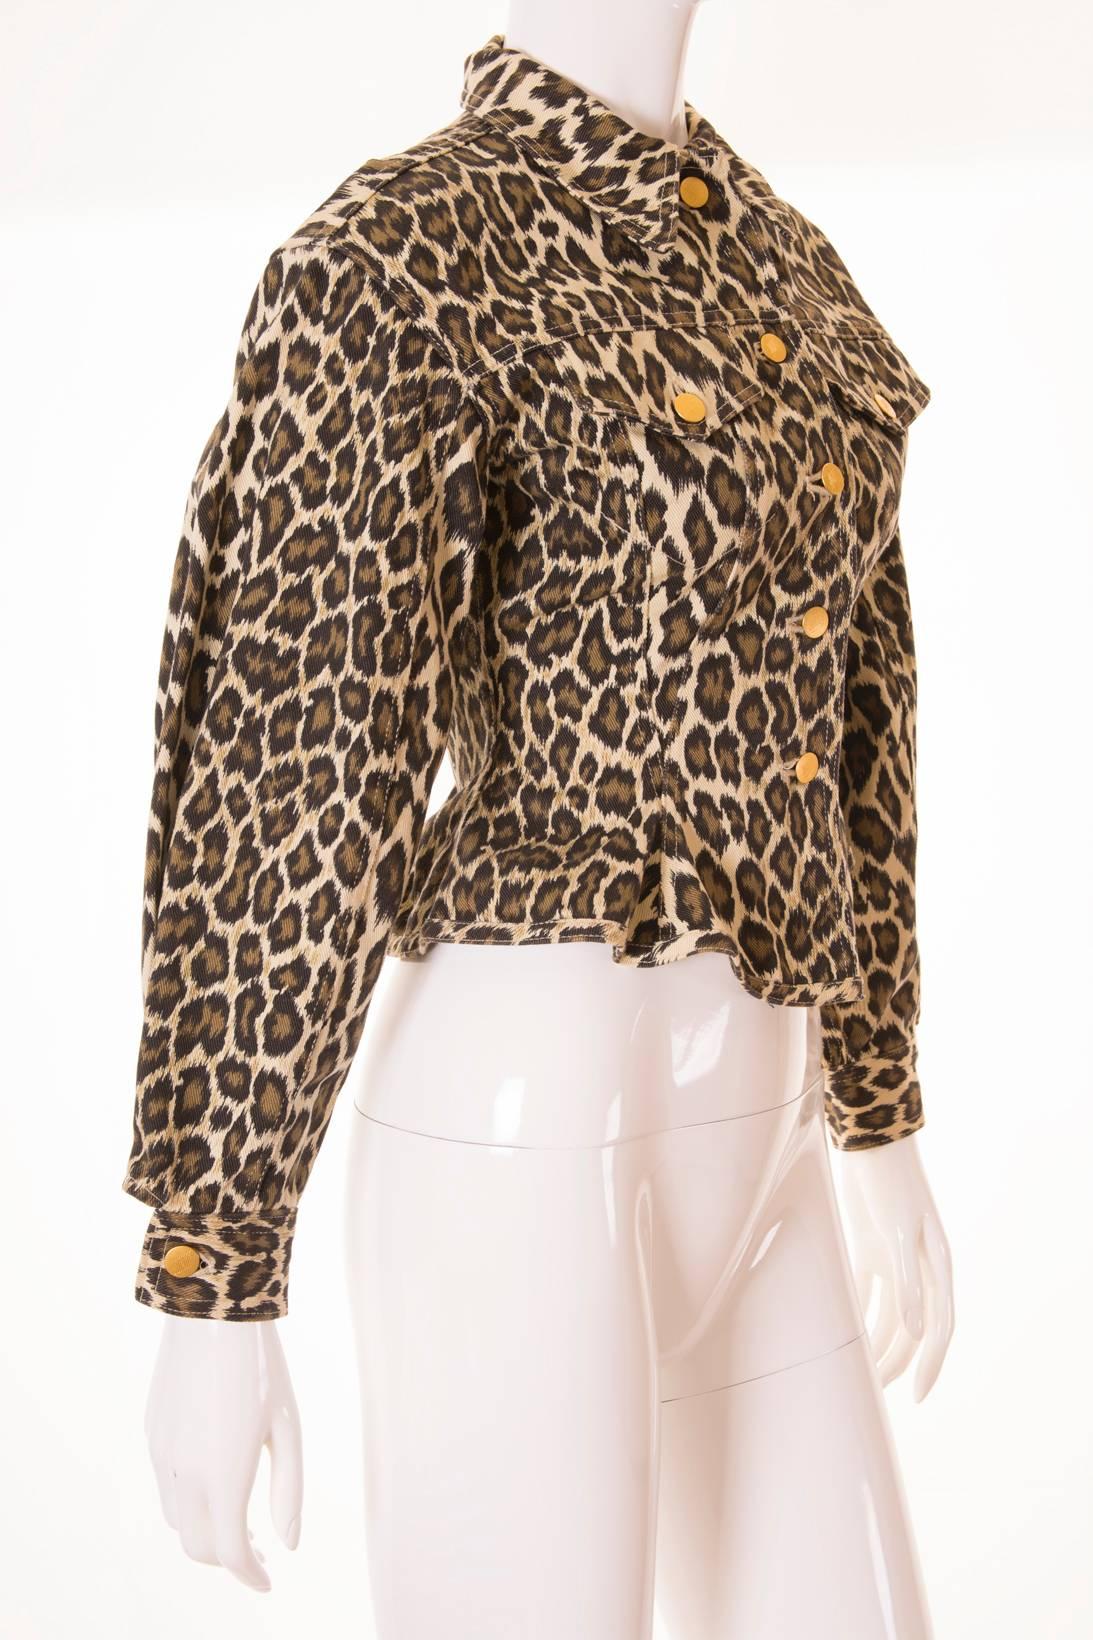 Denim jacket by Junior Gaultier. Circa 90s. Animal print. The fabric is quite sturdy so it keeps its shape. Exaggerated silhouette. Nips in at the waist and then flares out again. Sleeves which puff out. Gold junior Gaultier signature buttons. Two